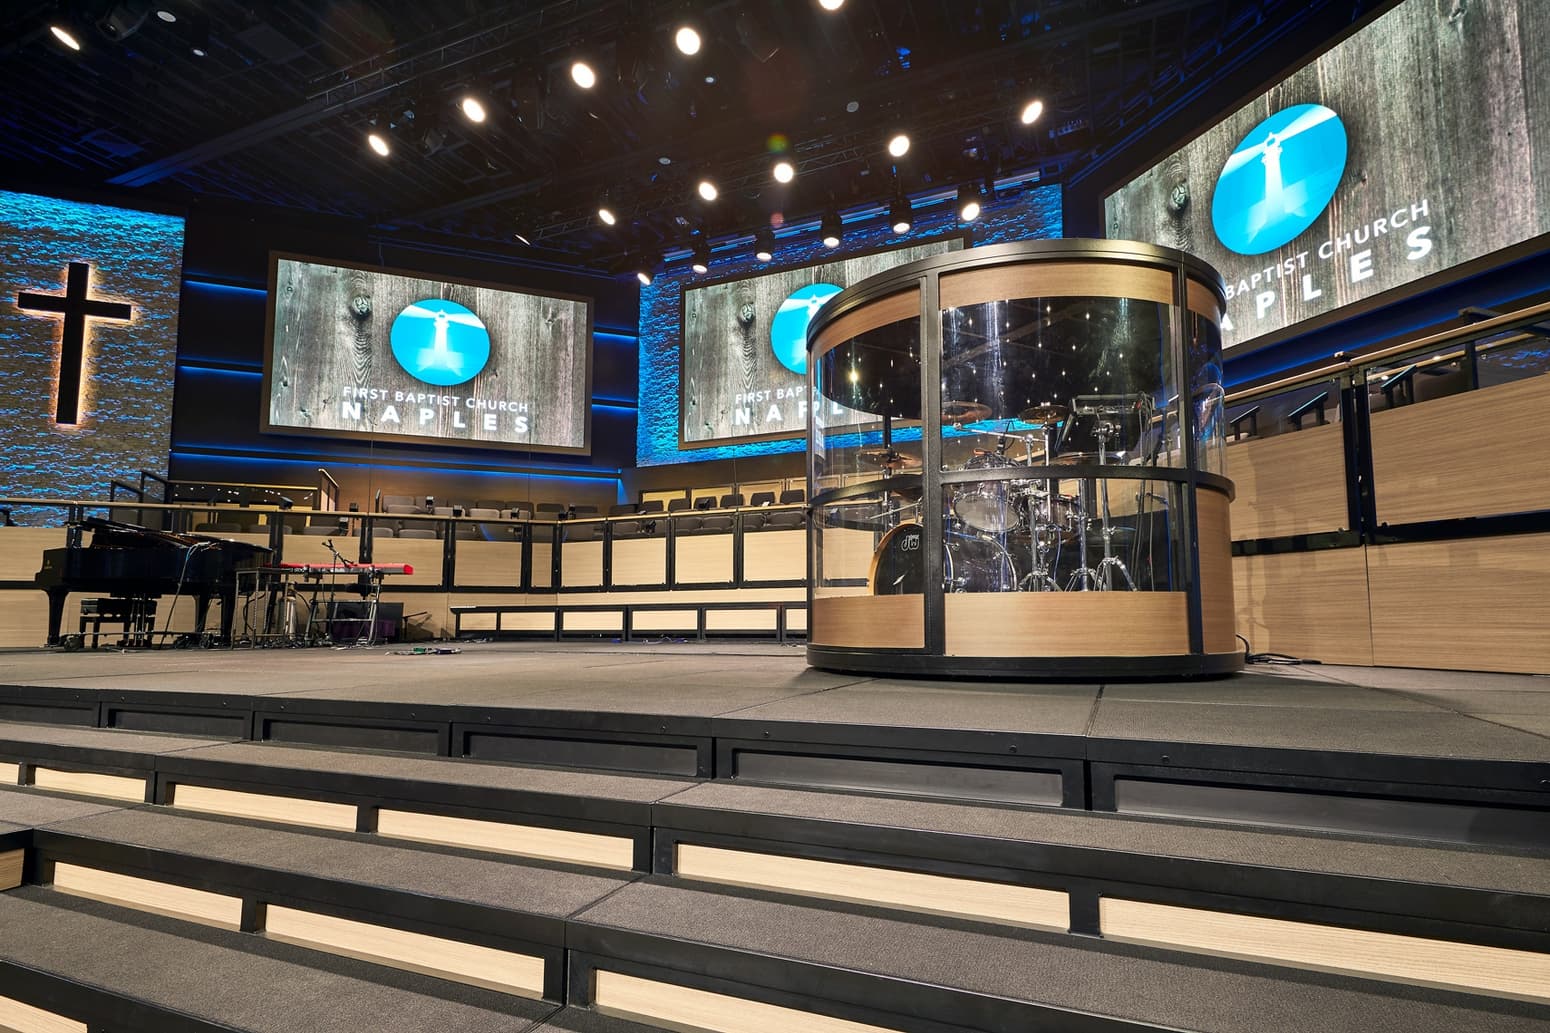 Modular stage design cubes lend to a clean stage design for any church or theater.